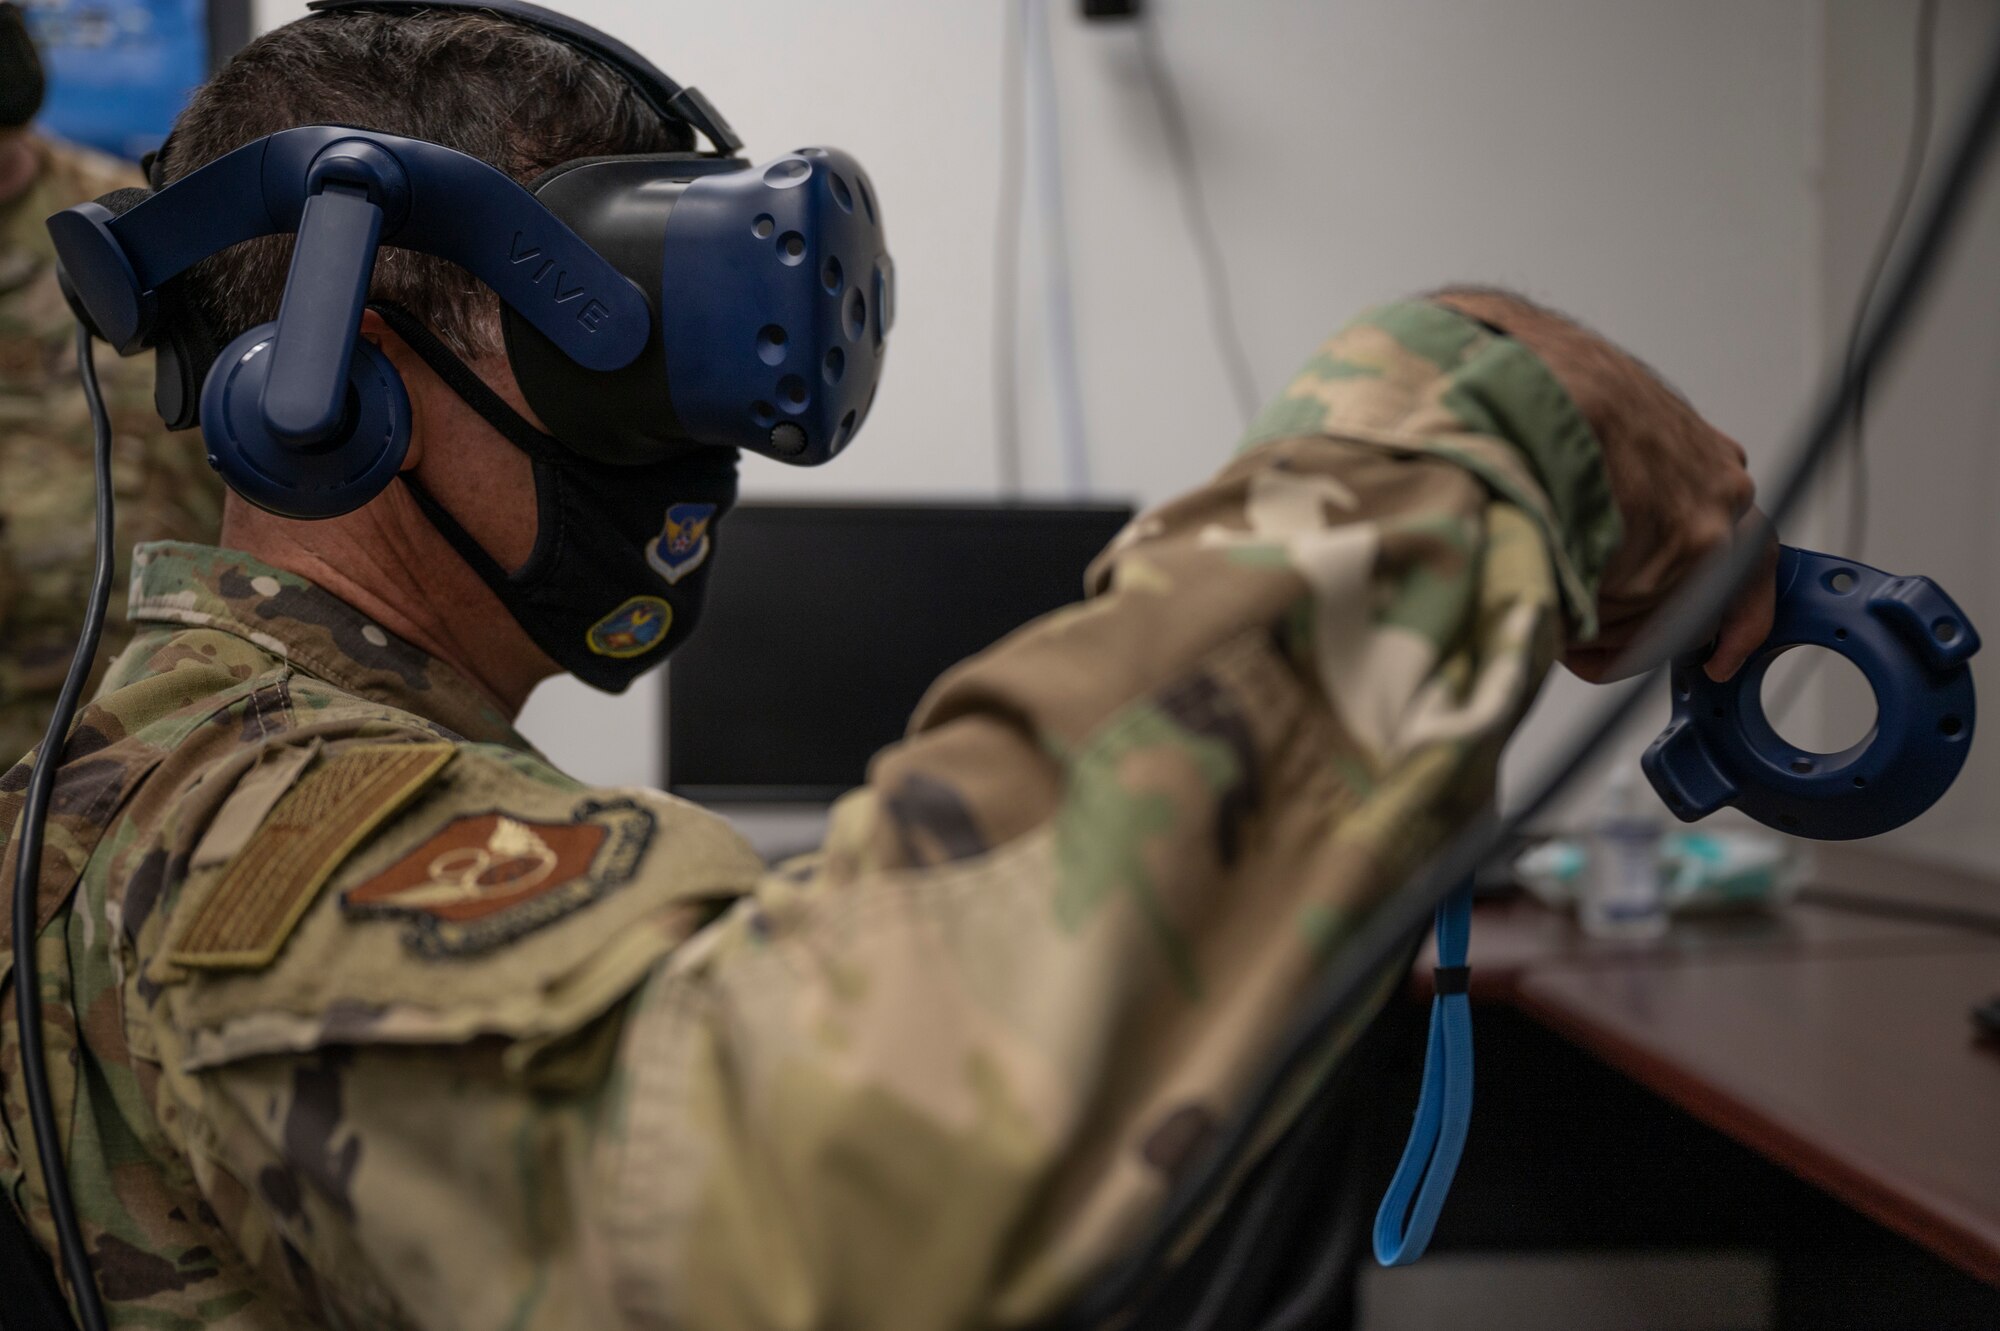 Maj. Gen. Andrew Gebara, 8th Air Force and Joint-Global Strike Operations Center commander, tests a virtual reality training headset at Dyess Air Force Base, Texas, Aug. 23, 2021. Gebara participated in an engine test cell virtual reality fire training scenario. (U.S. Air Force photo by Senior Airman Colin Hollowell)